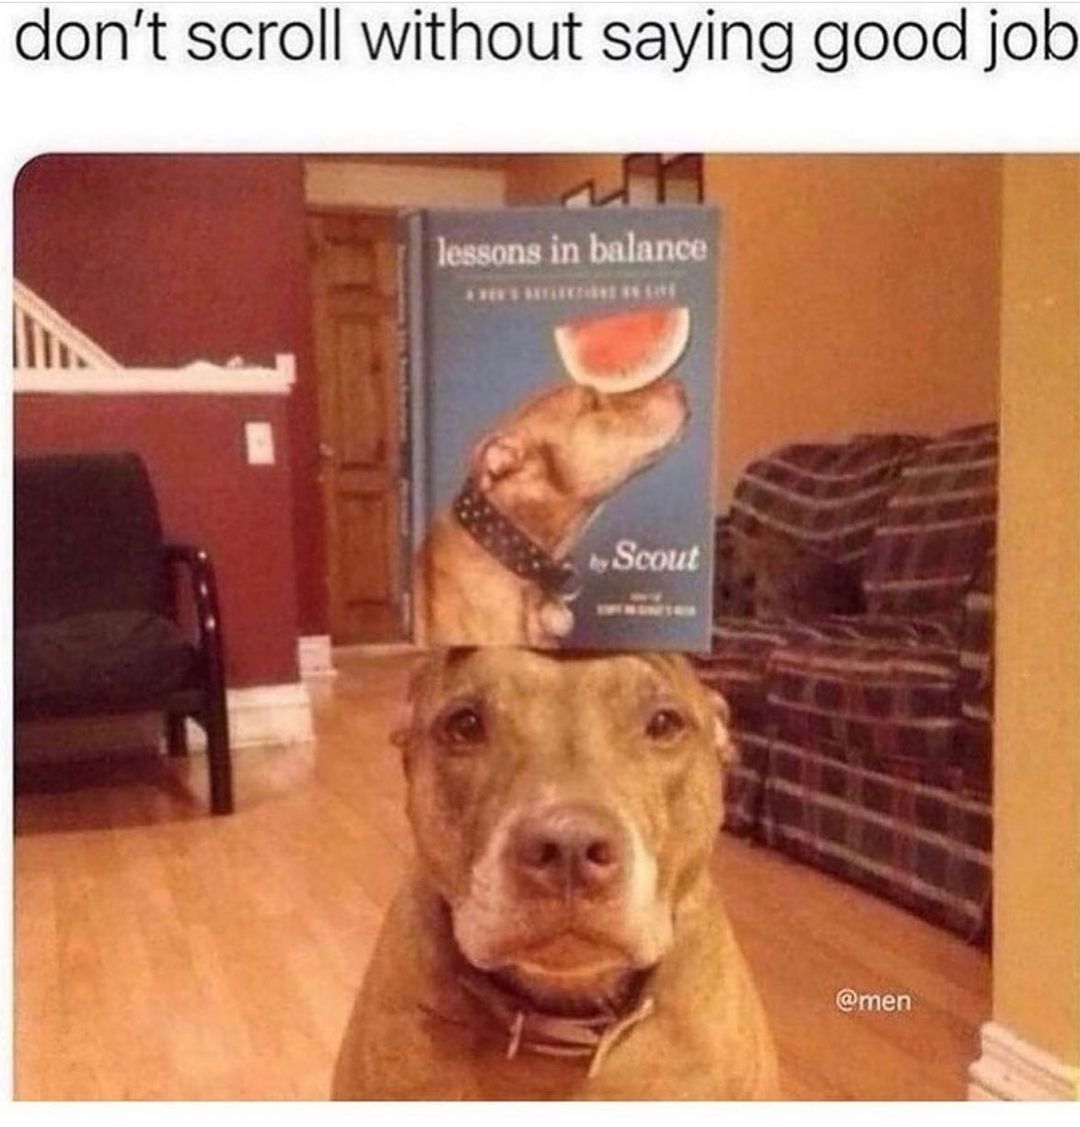 Don't scroll without saying good job.